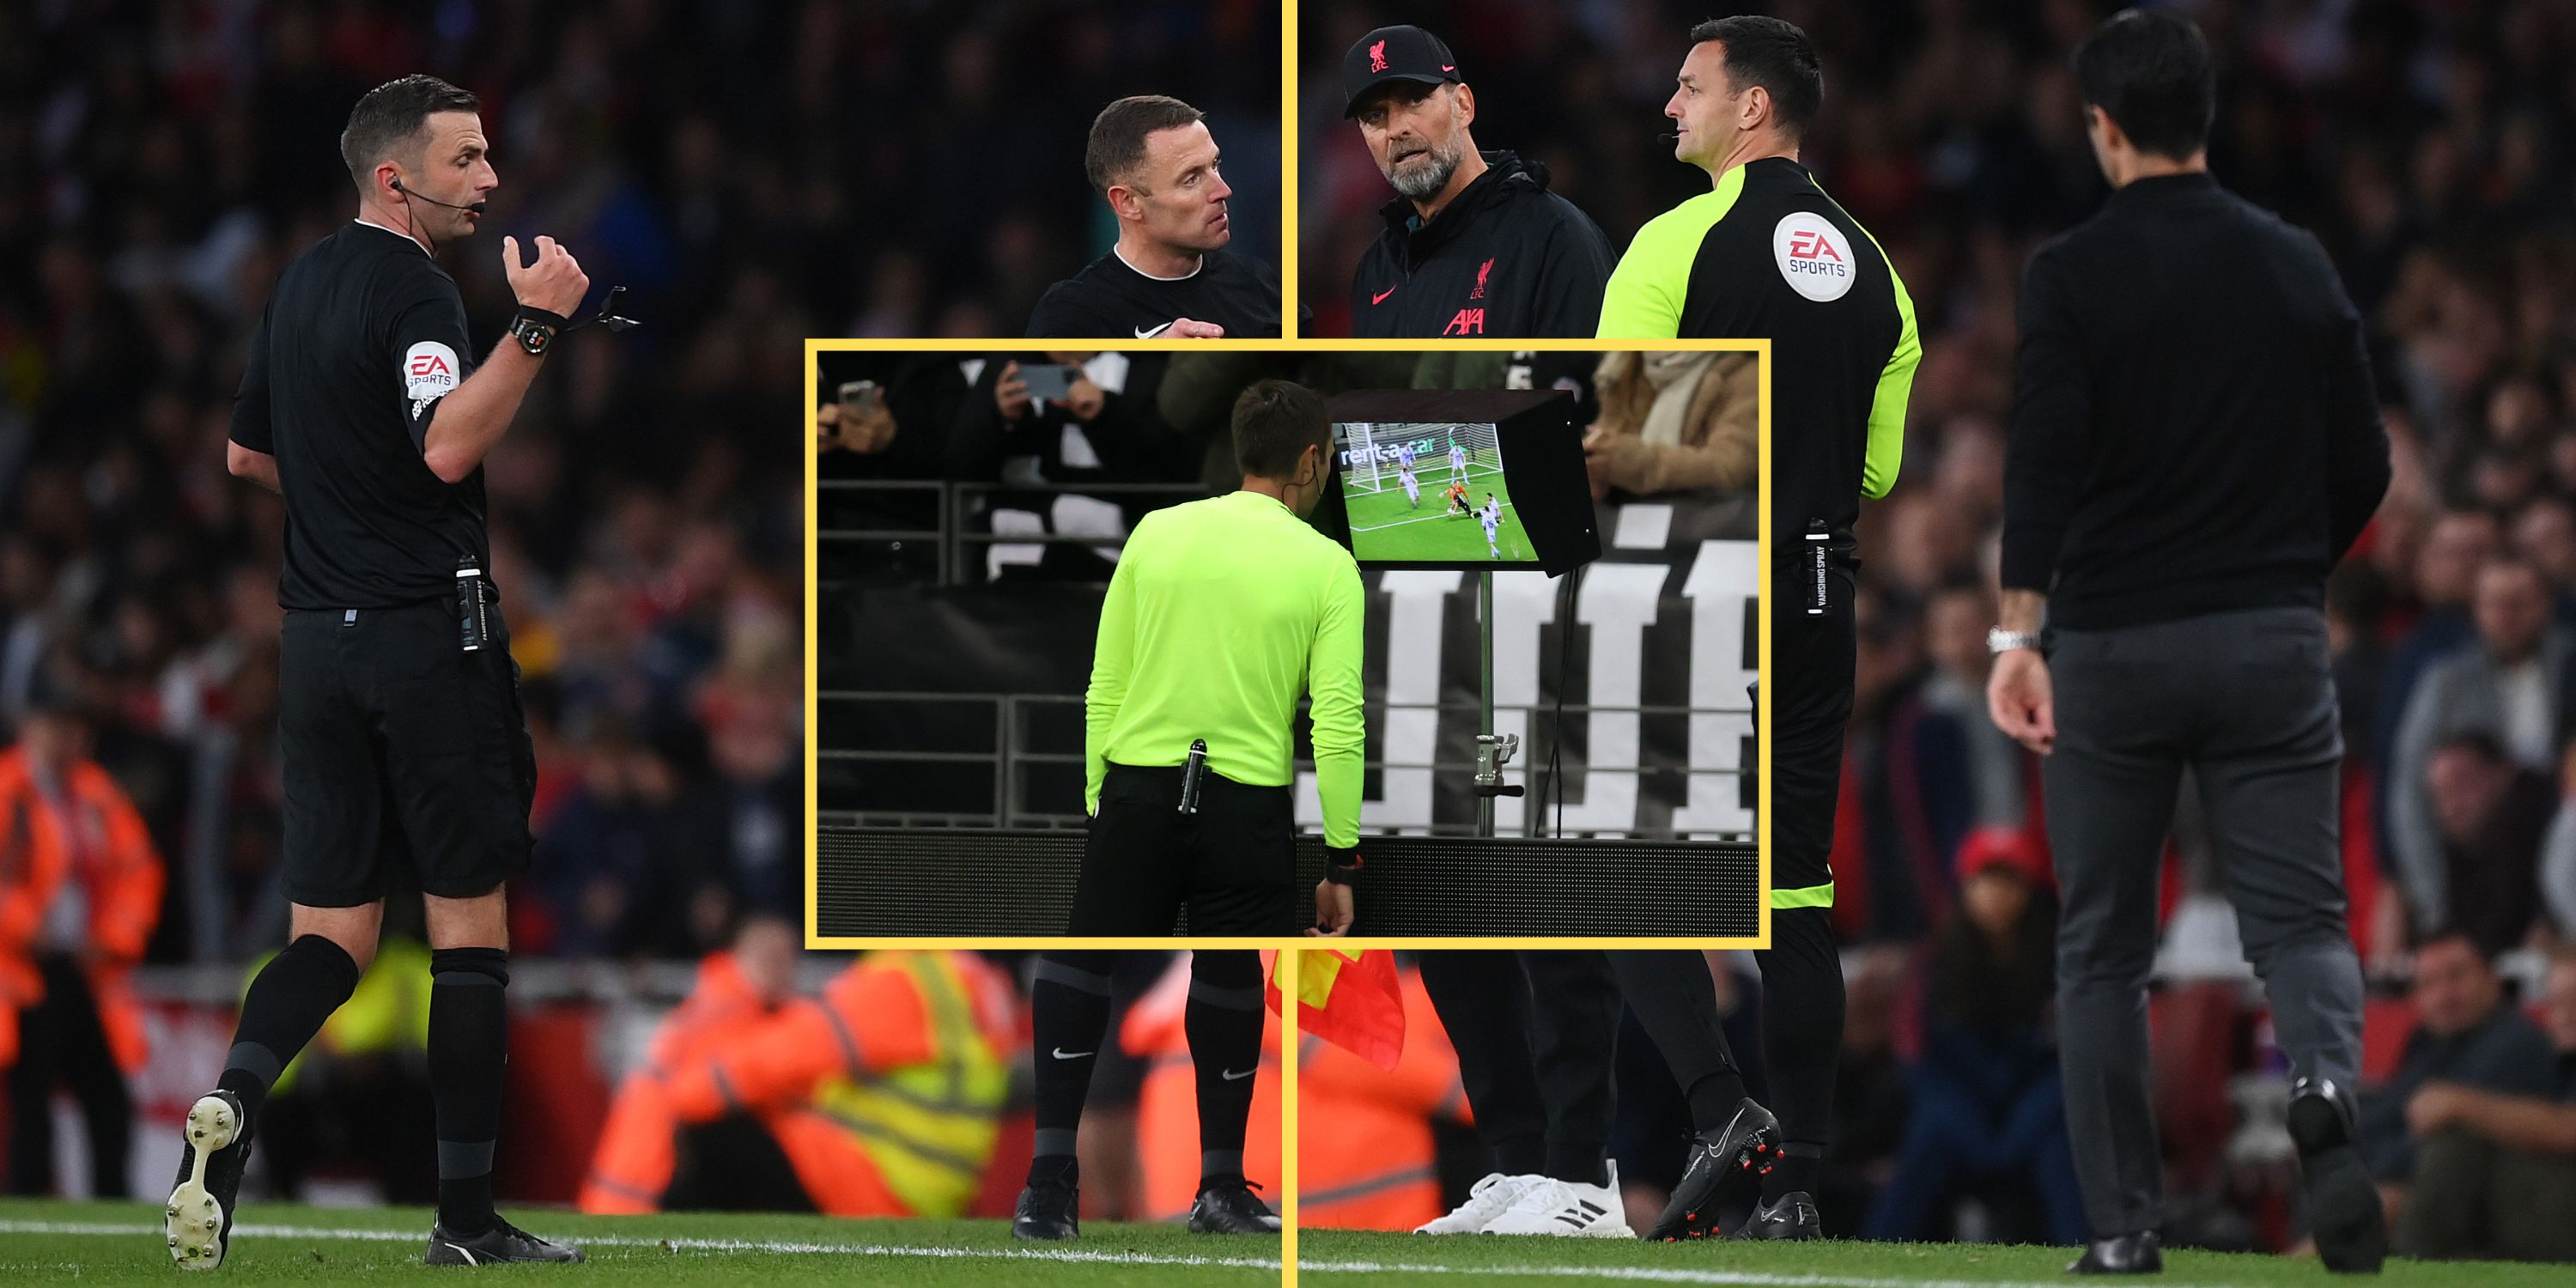 (Images) Side-by-side view of controversial penalty calls suggest VAR cost Liverpool in Arsenal defeat